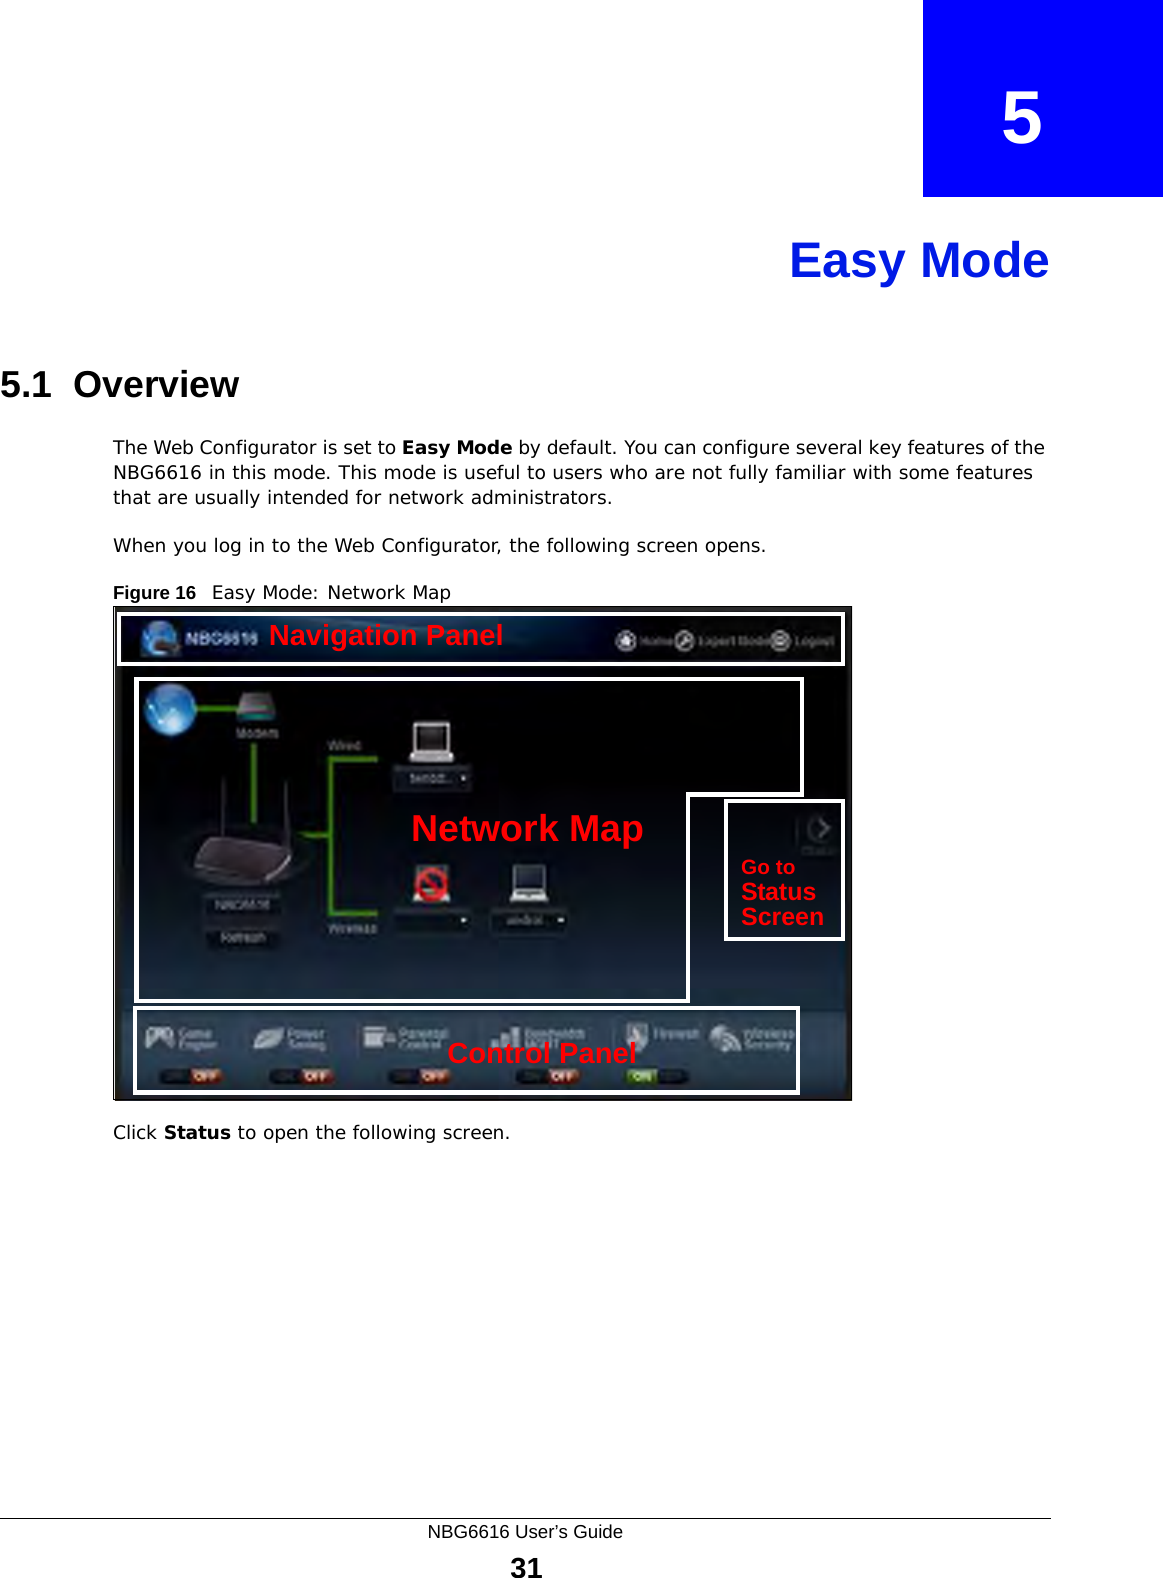 NBG6616 User’s Guide31CHAPTER   5Easy Mode5.1  OverviewThe Web Configurator is set to Easy Mode by default. You can configure several key features of the NBG6616 in this mode. This mode is useful to users who are not fully familiar with some features that are usually intended for network administrators.When you log in to the Web Configurator, the following screen opens.Figure 16   Easy Mode: Network Map Click Status to open the following screen.Network MapControl PanelGo toStatusScreenNavigation Panel